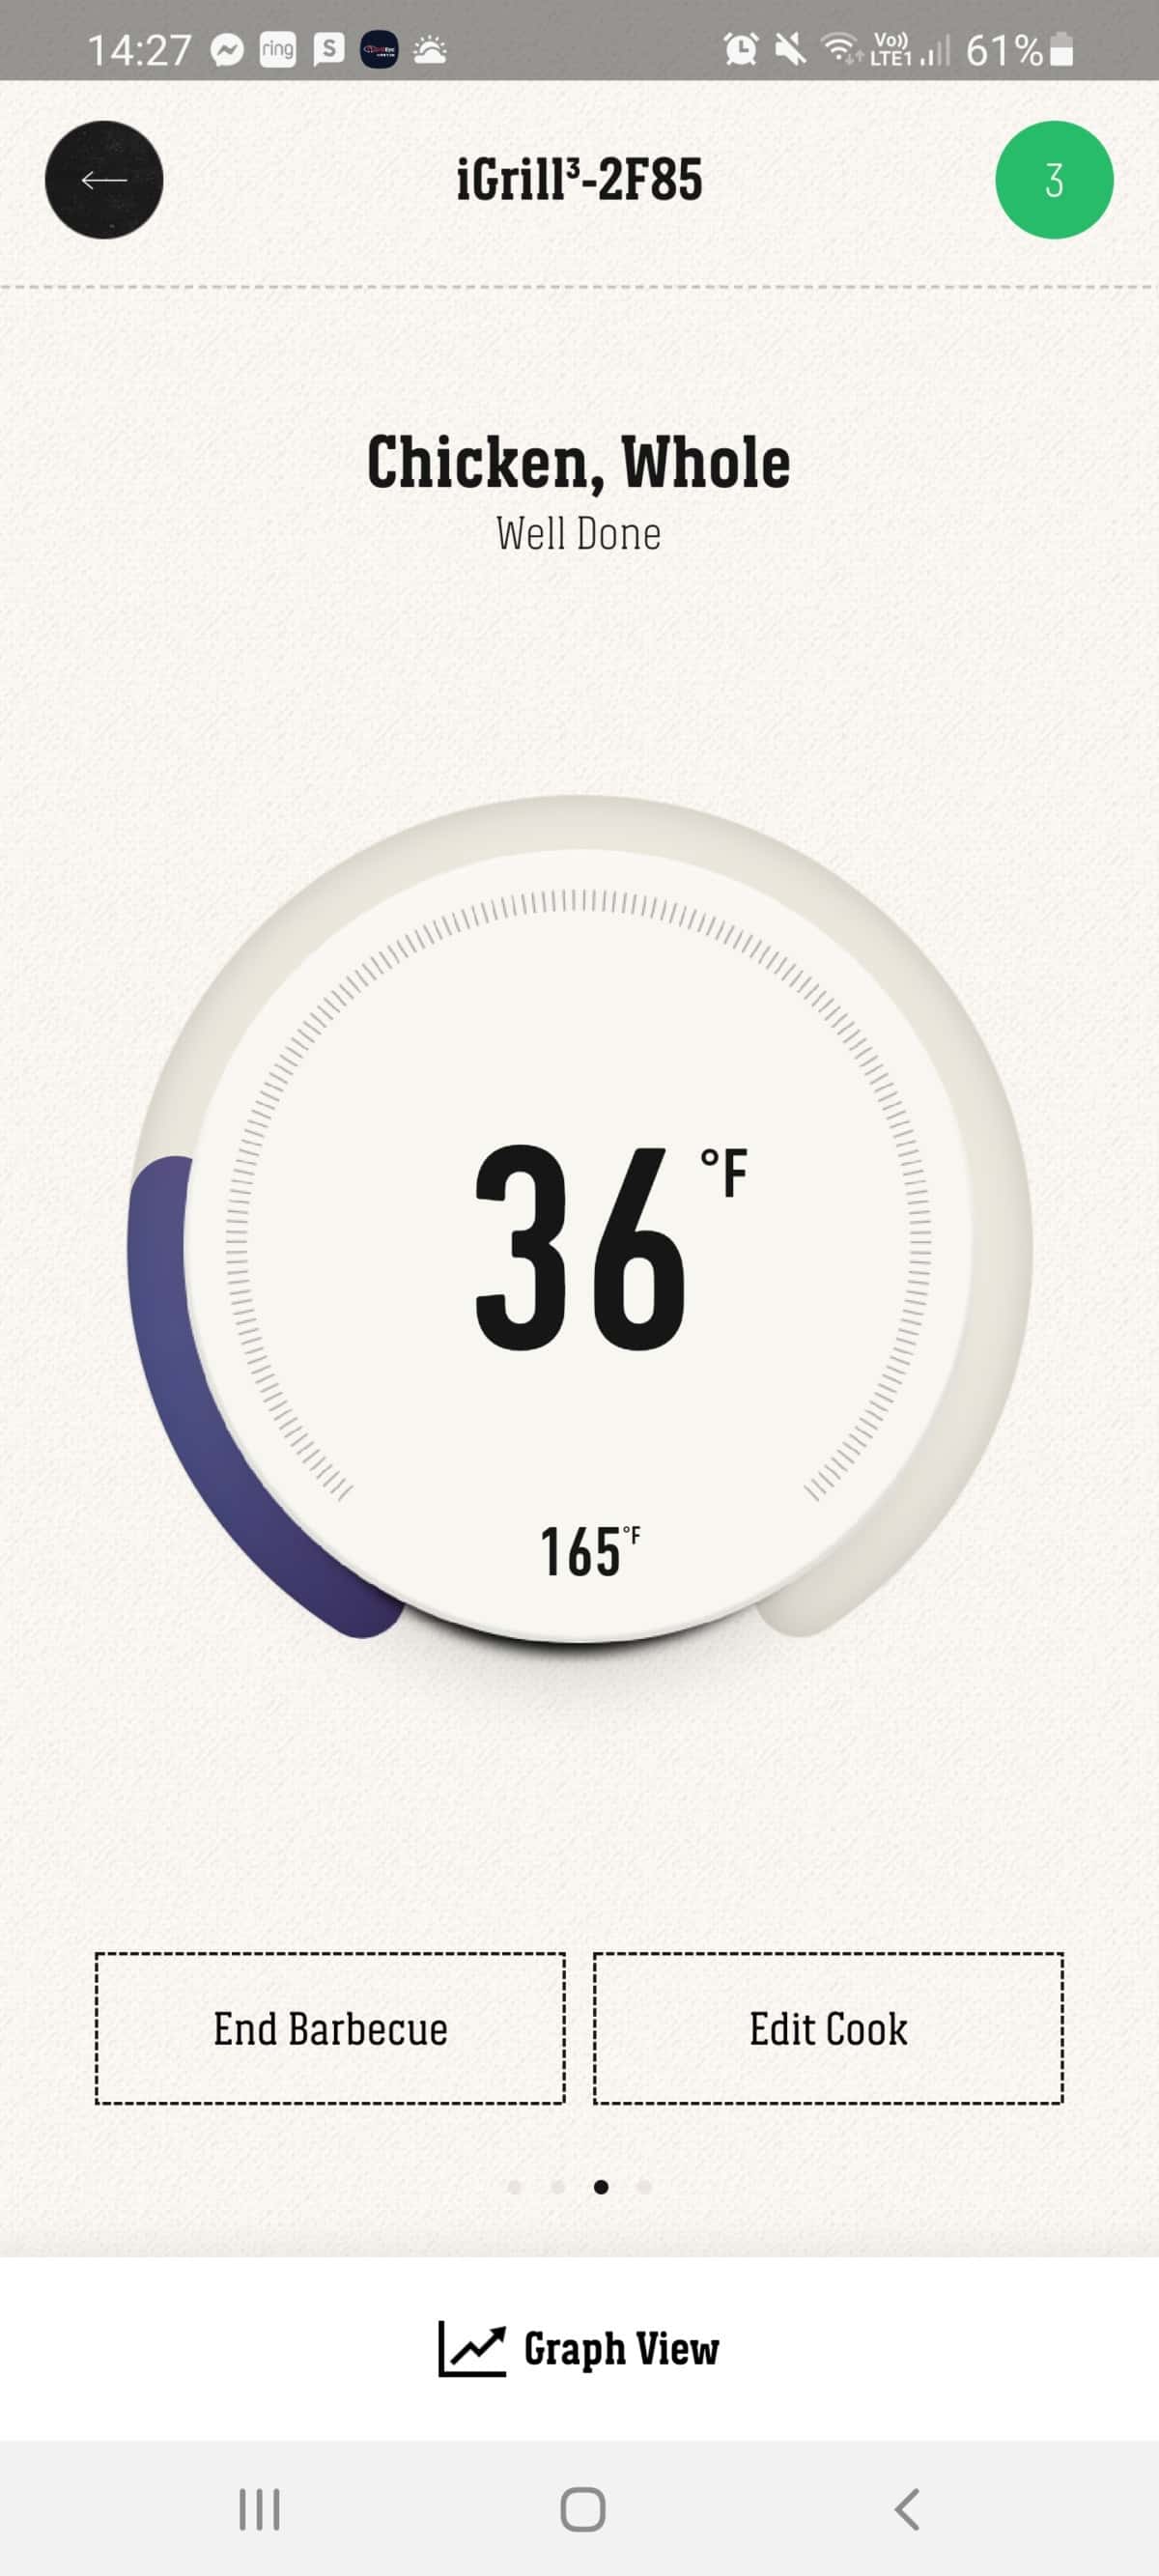 Weber iGrill smartphone screenshot showing 36 degrees on a food probe